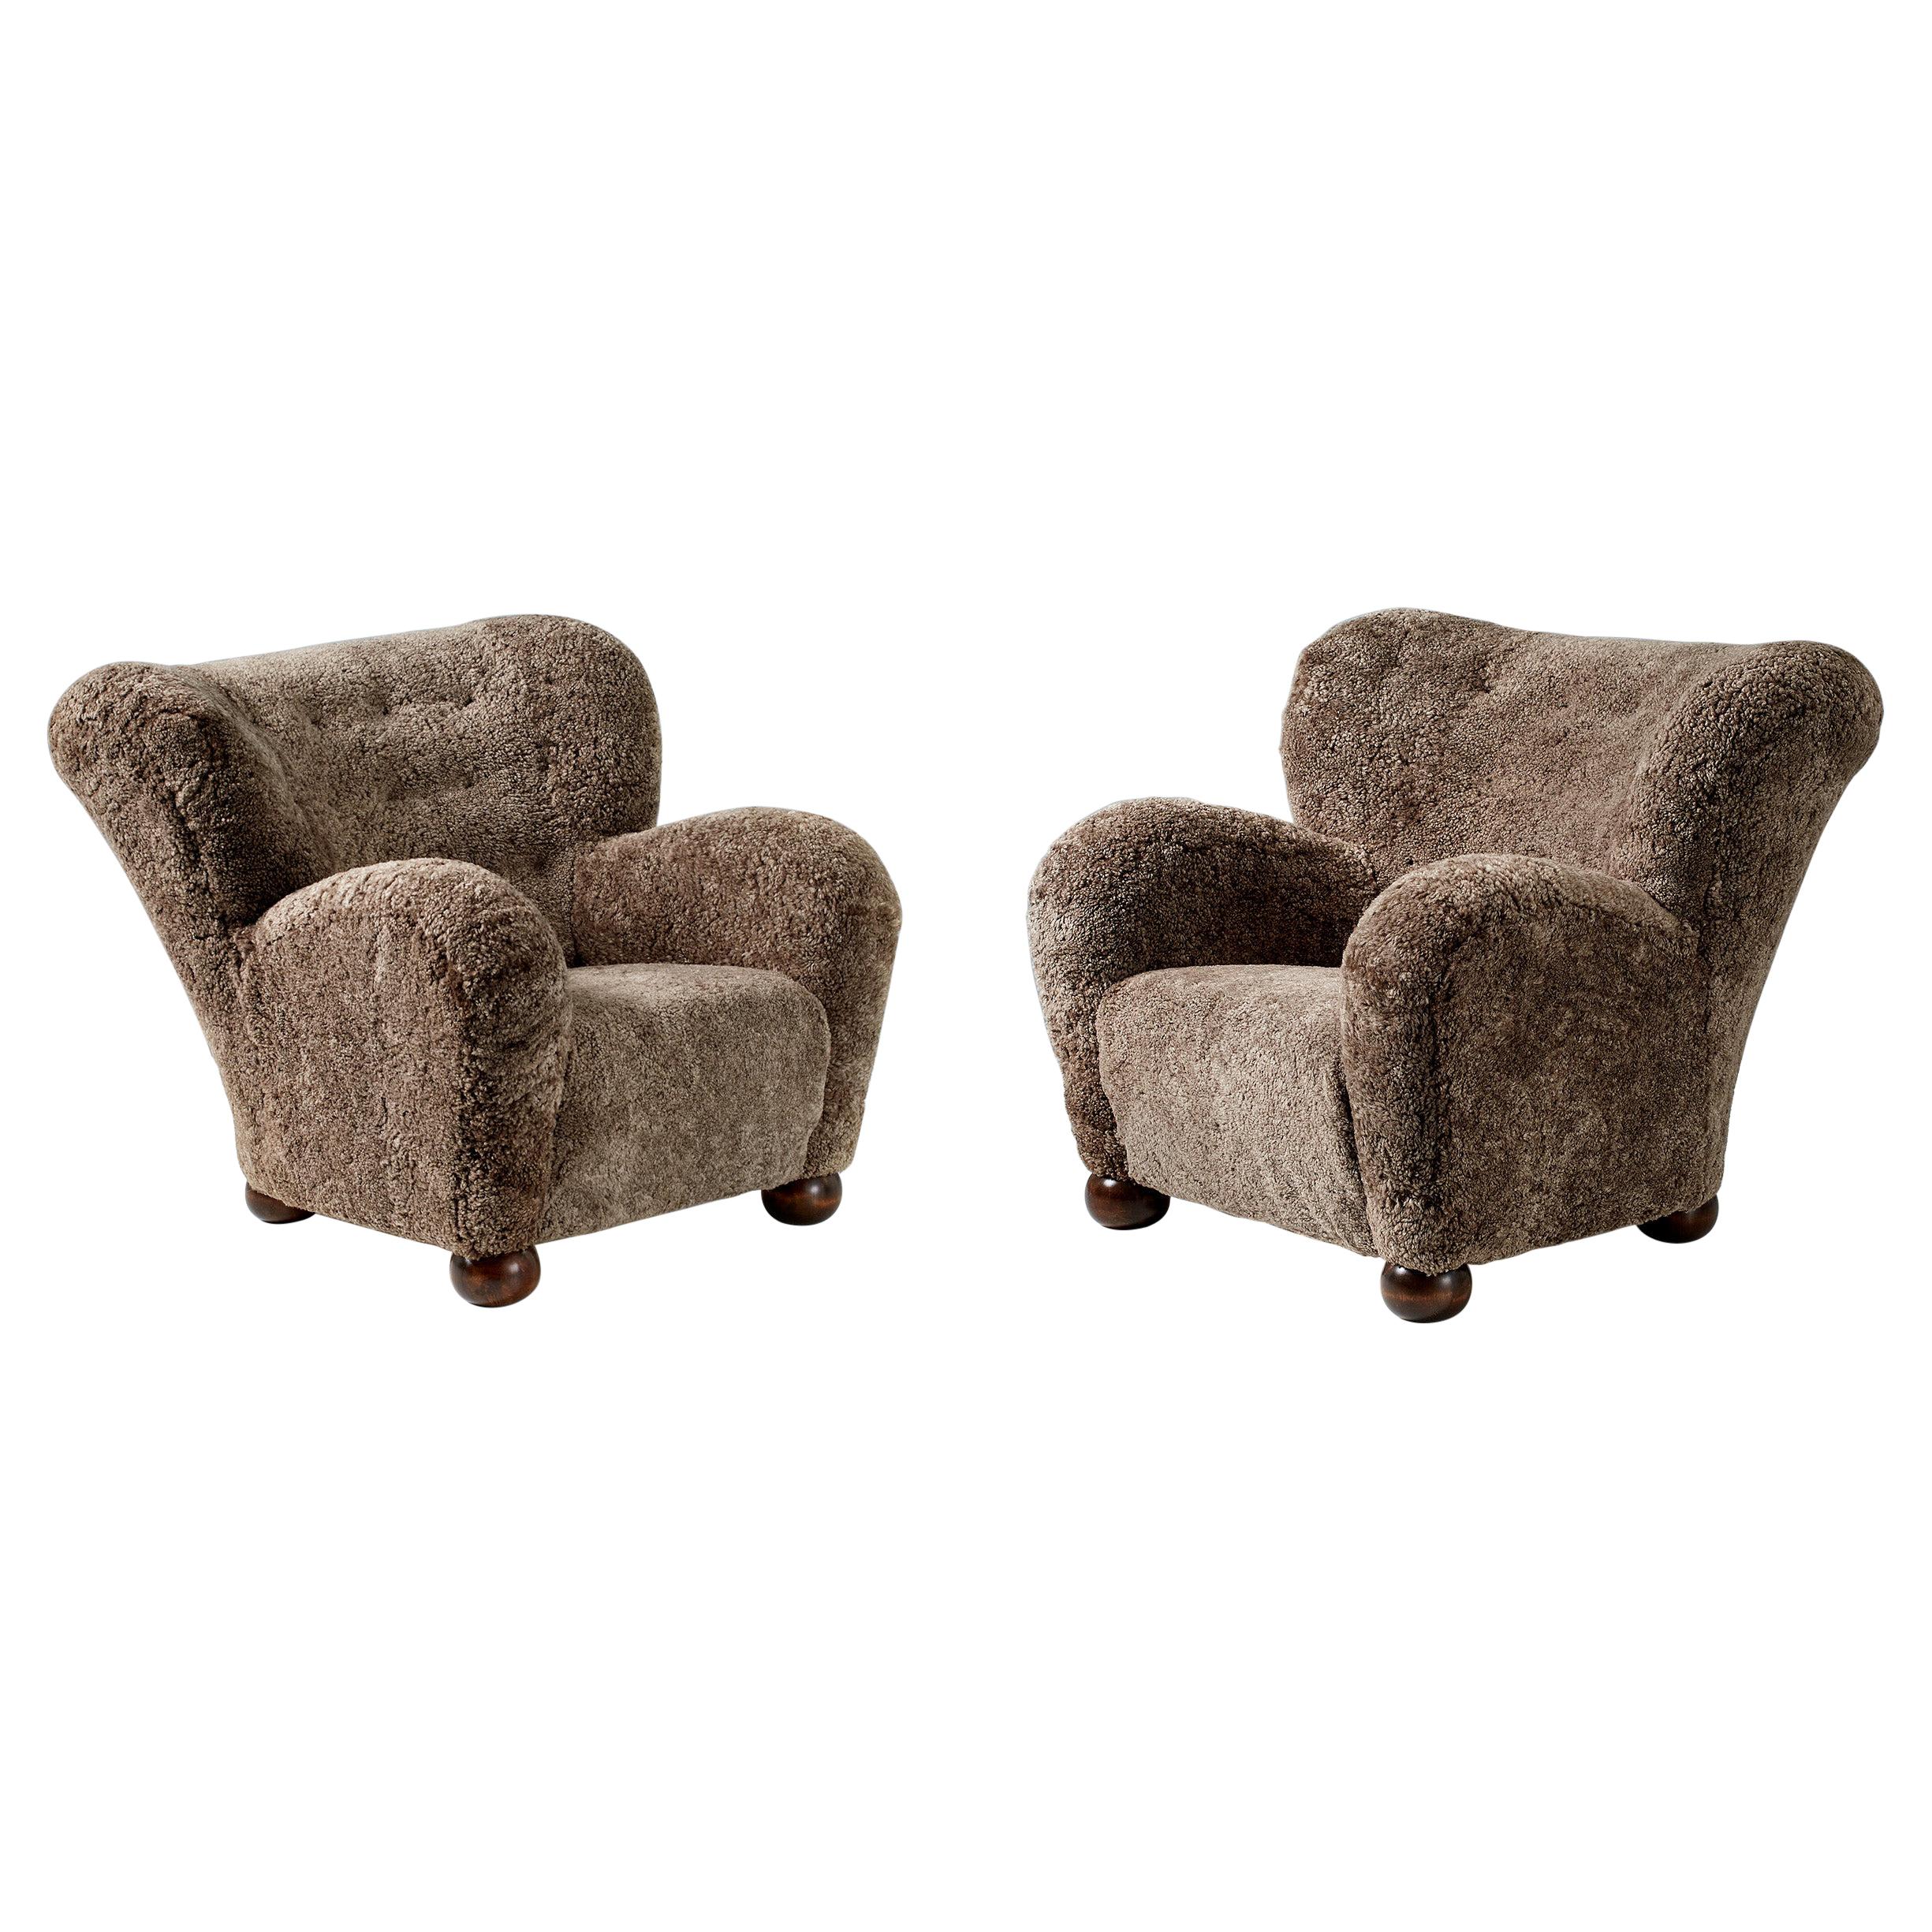 Pair of Marta Blomstedt 1930s Sheepskin Wing Chairs for the Hotel Aulanko